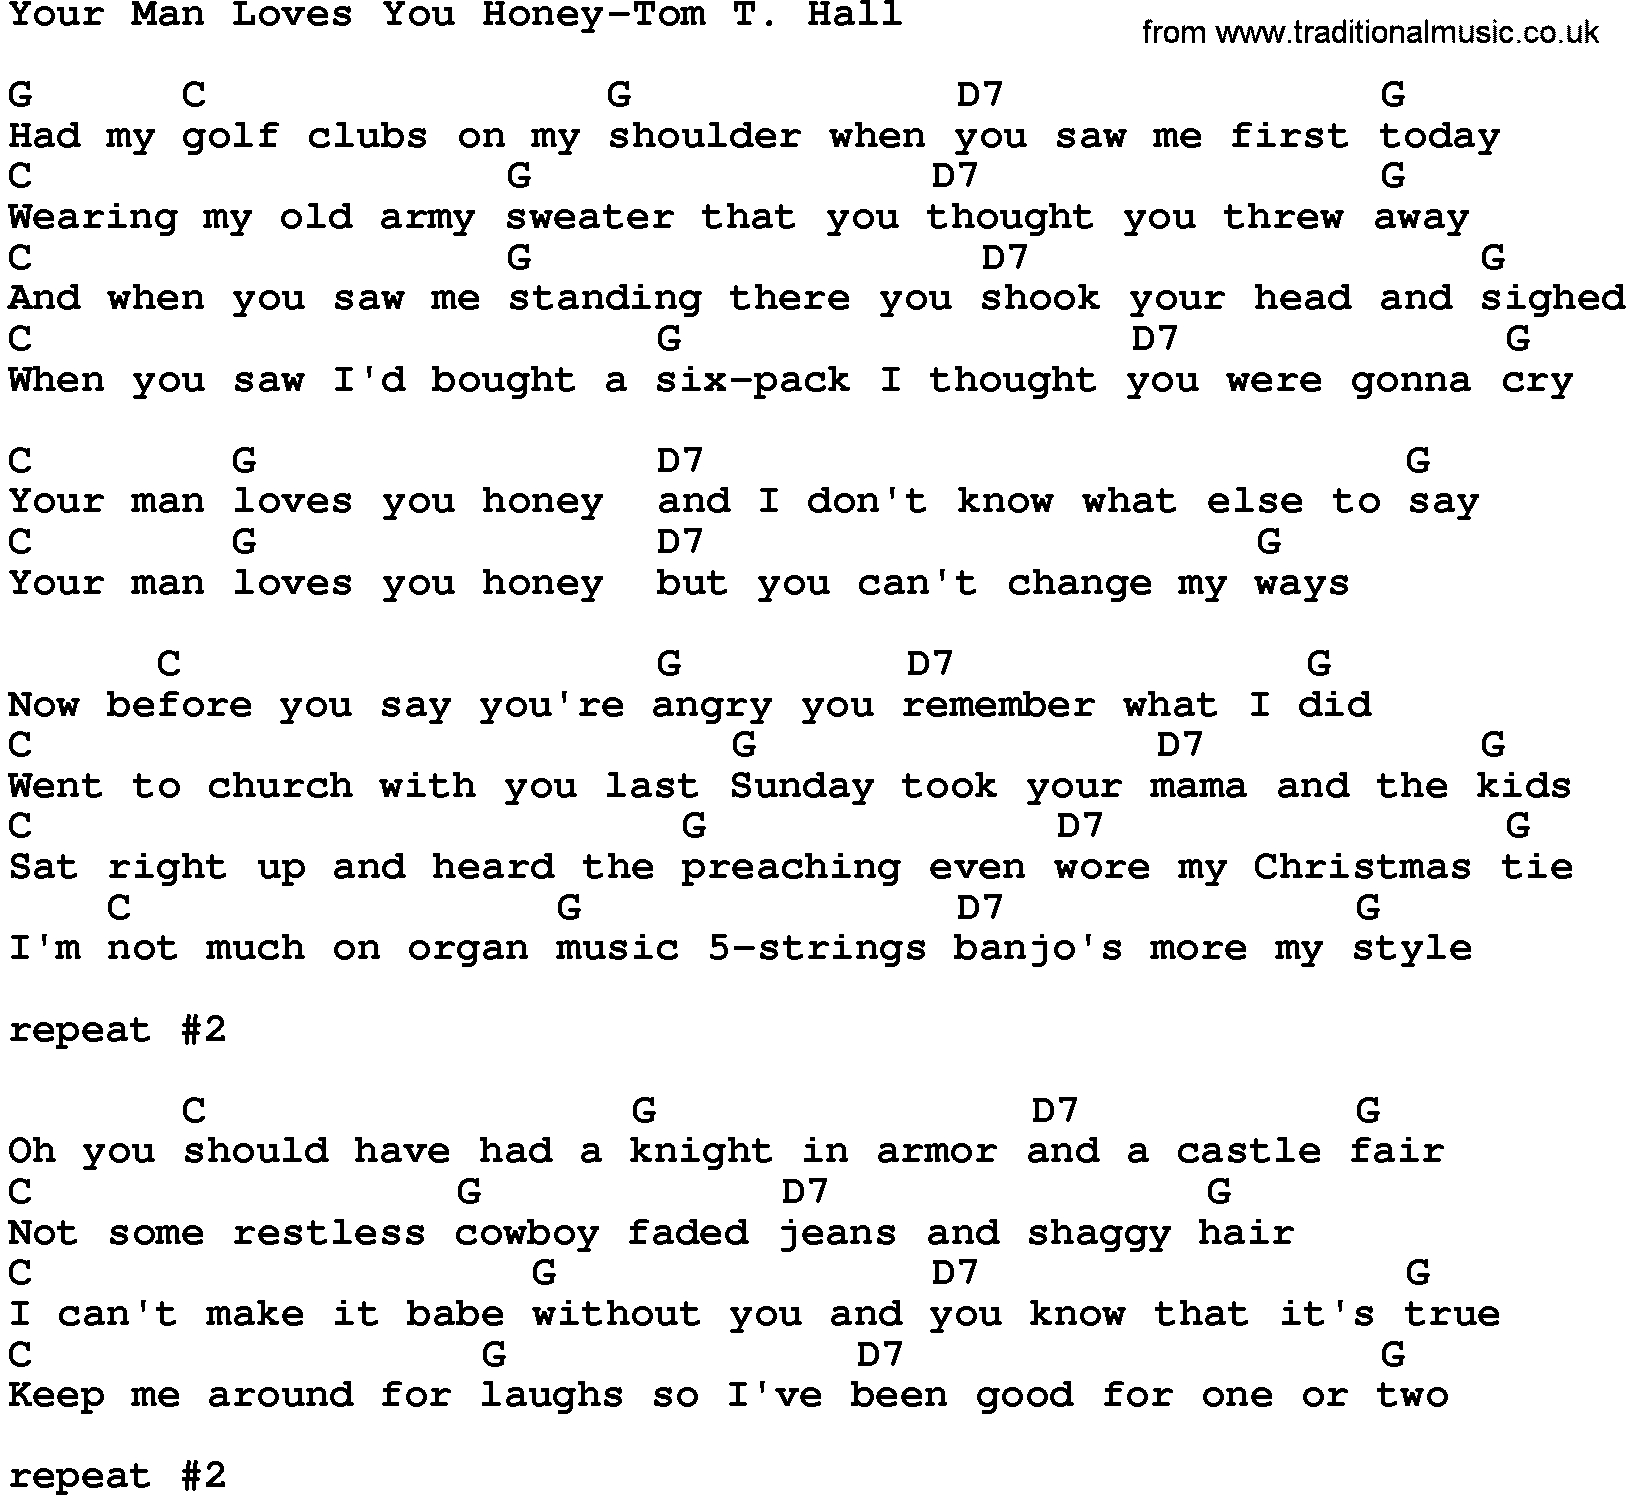 When I Was Your Man Chords Country Musicyour Man Loves You Honey Tom T Hall Lyrics And Chords